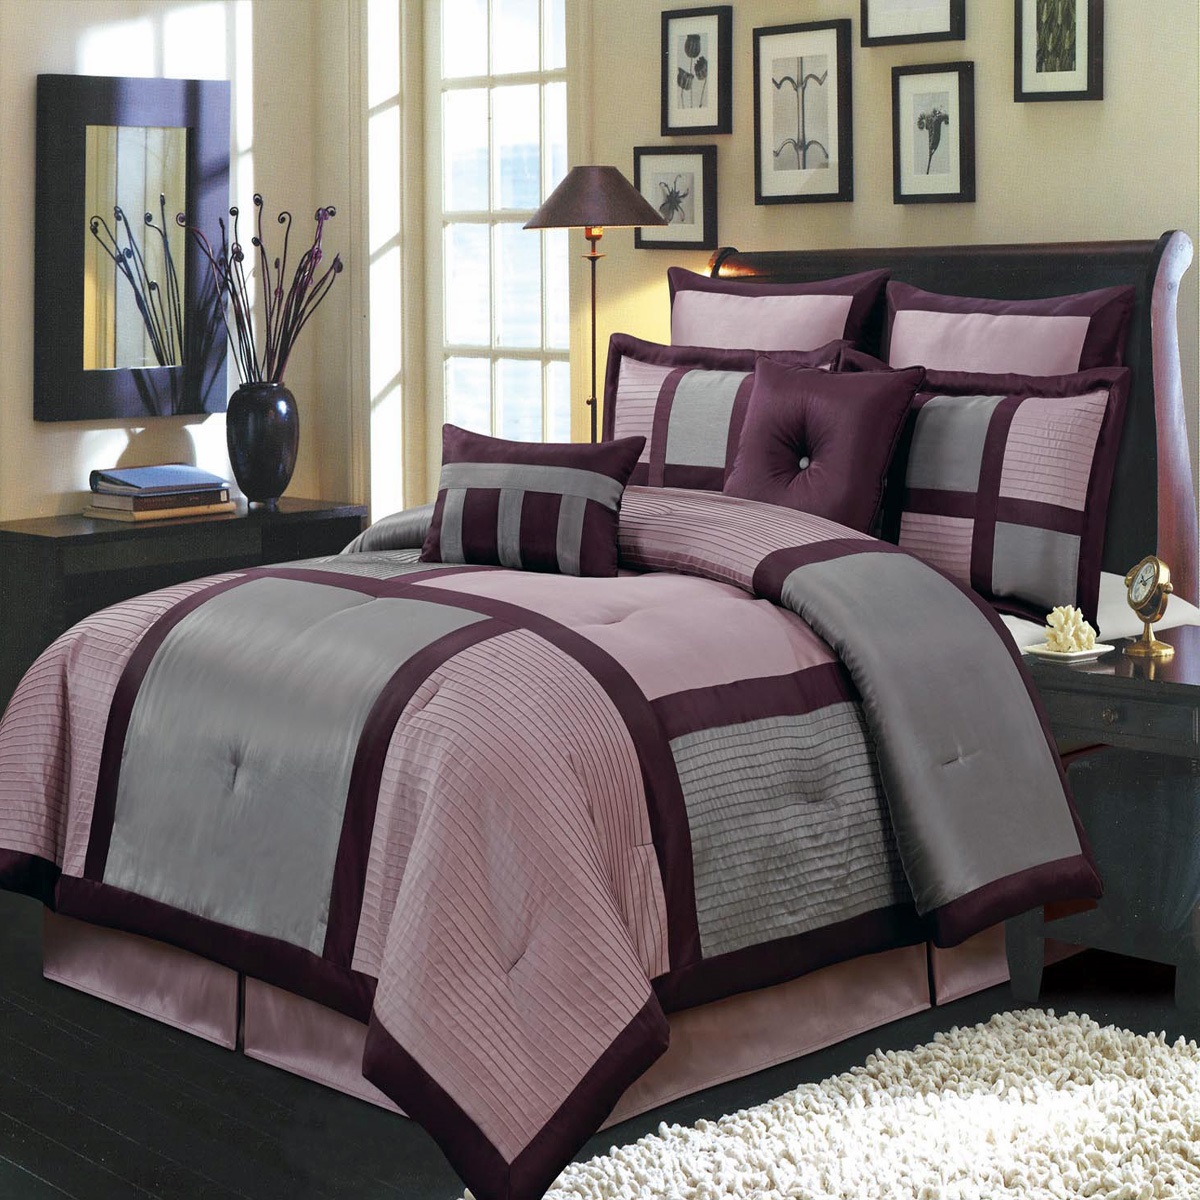 GoLinens Luxury Purple and Gray Shades 12-Piece Plum Bed in a Bag